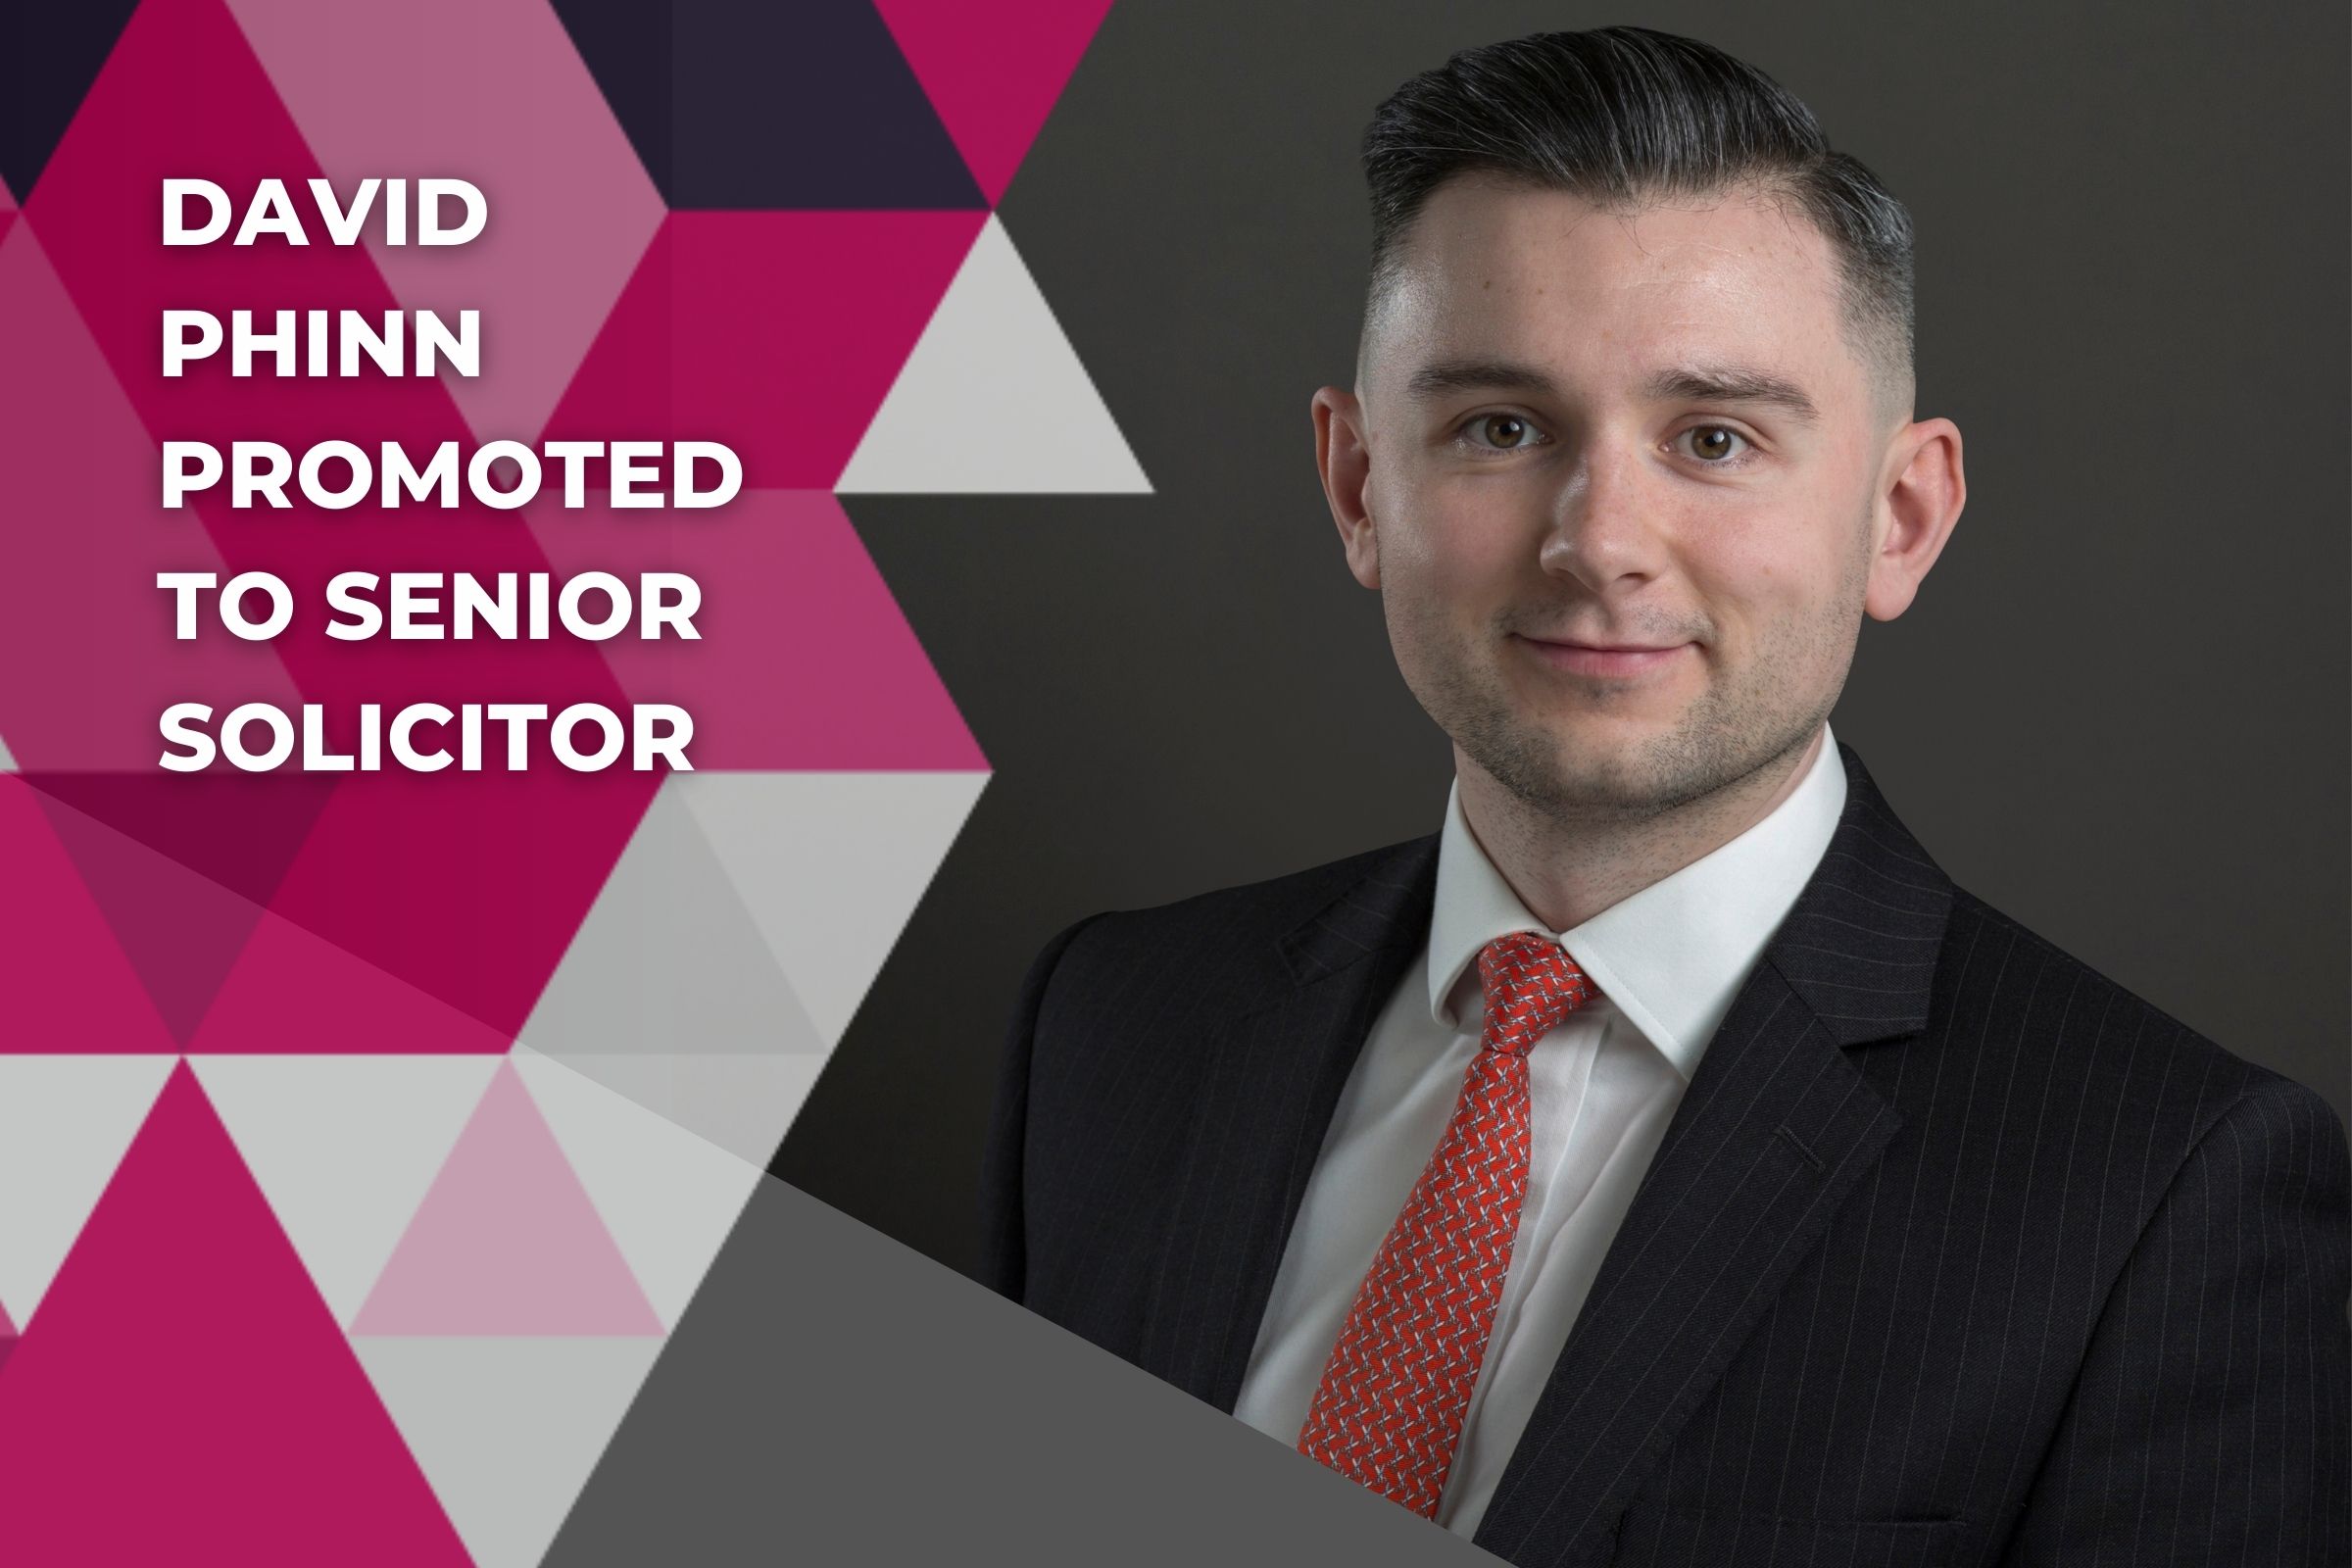 David Phinn promoted to Senior Solicitor